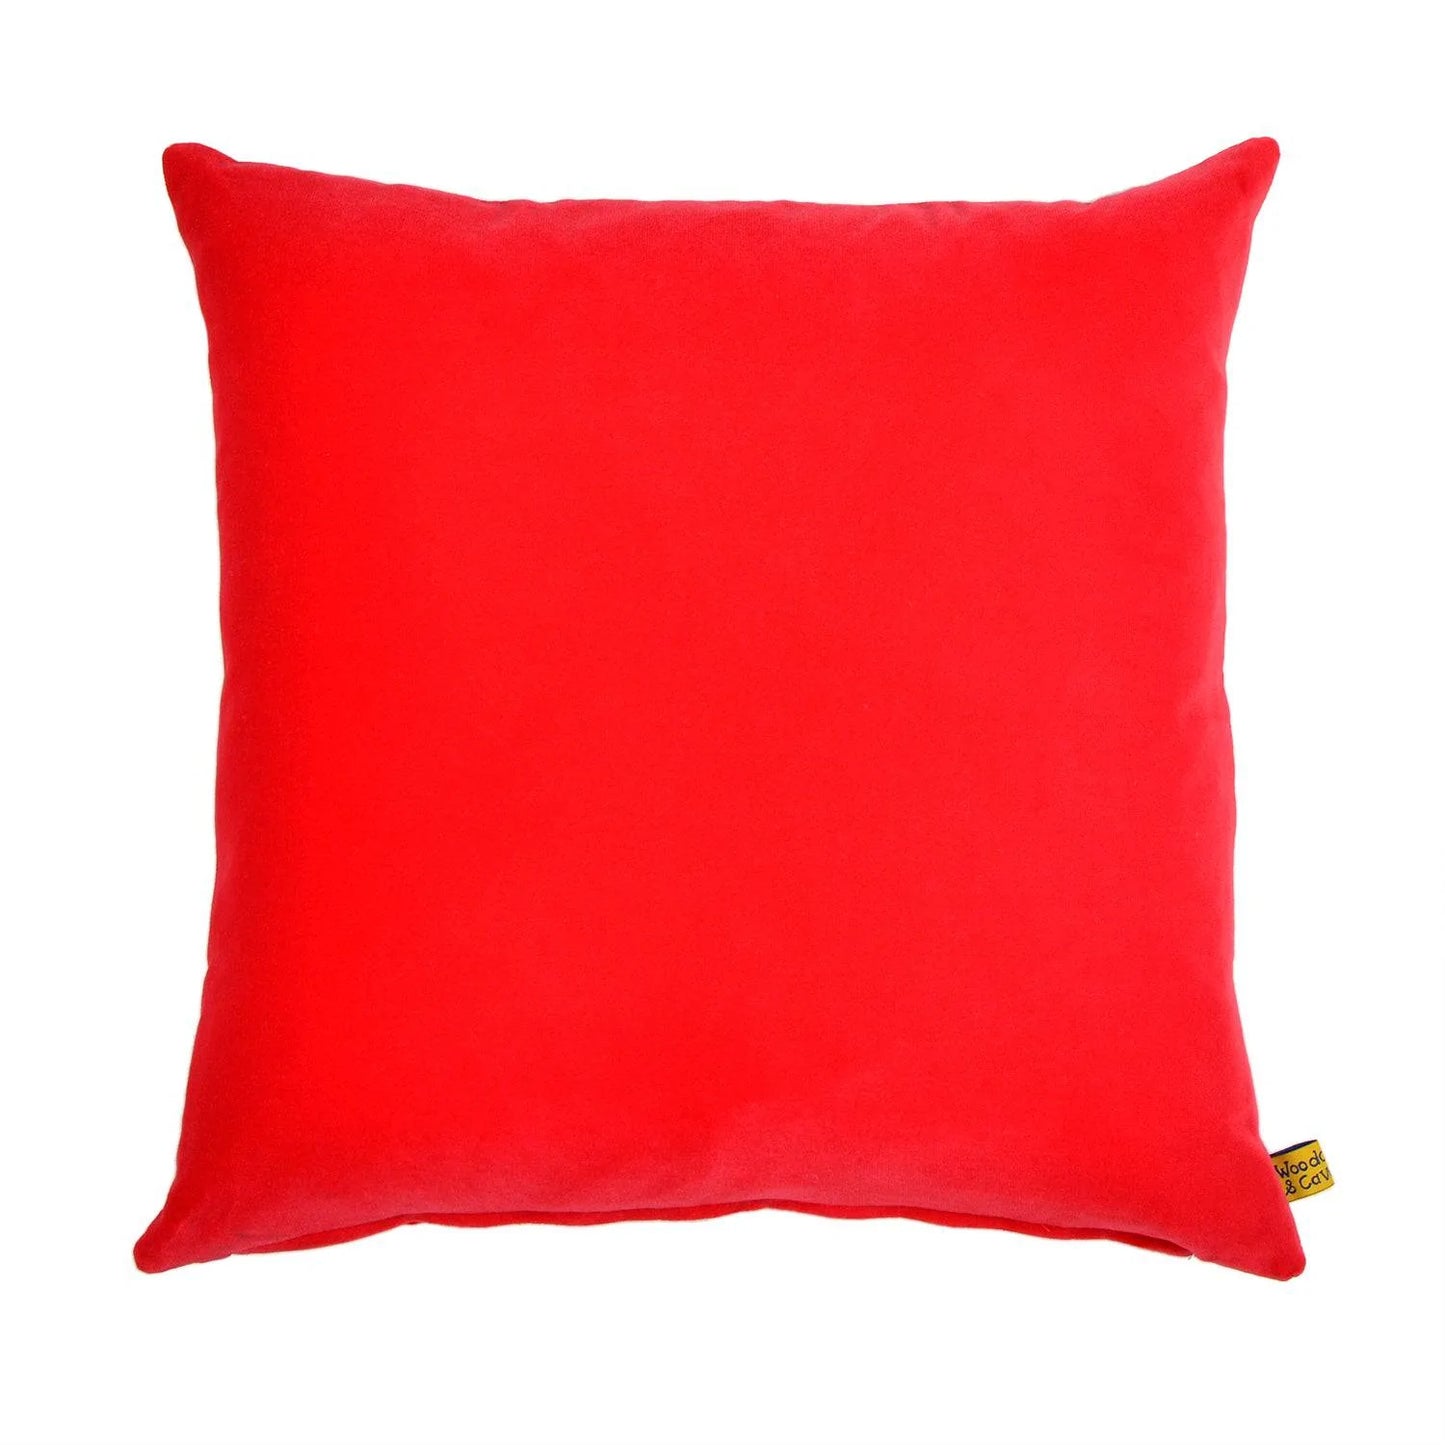 Silk Velvet Cushion in Cerise Pink by Woodcock & Cavendish for sale - Woodcock and Cavendish